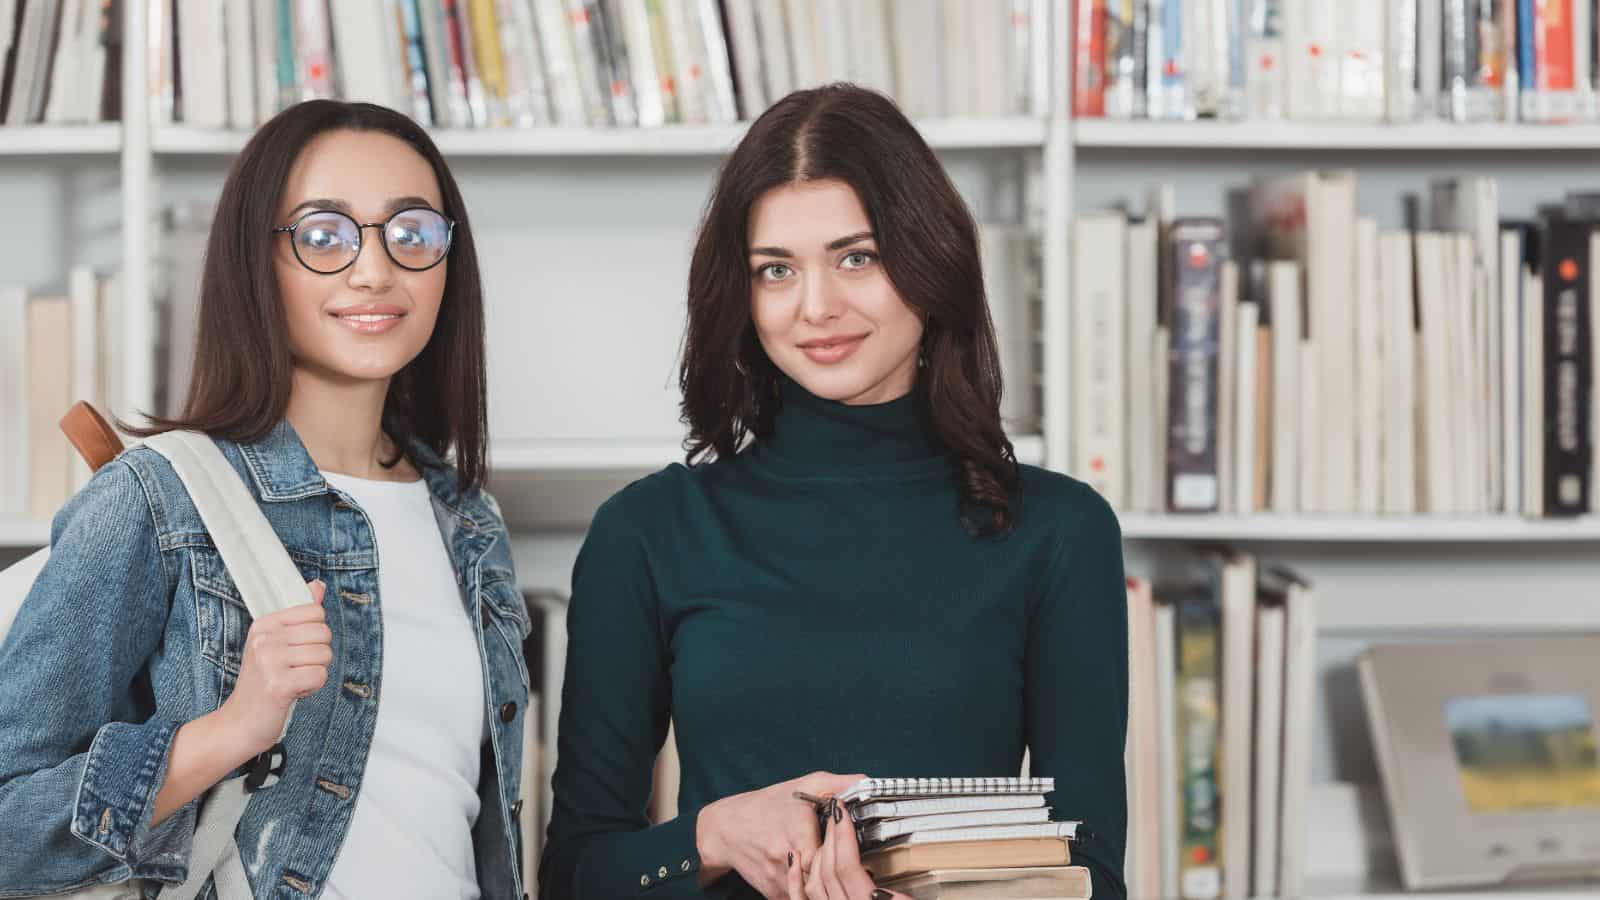 Smiling multicultural friends looking at camera in library